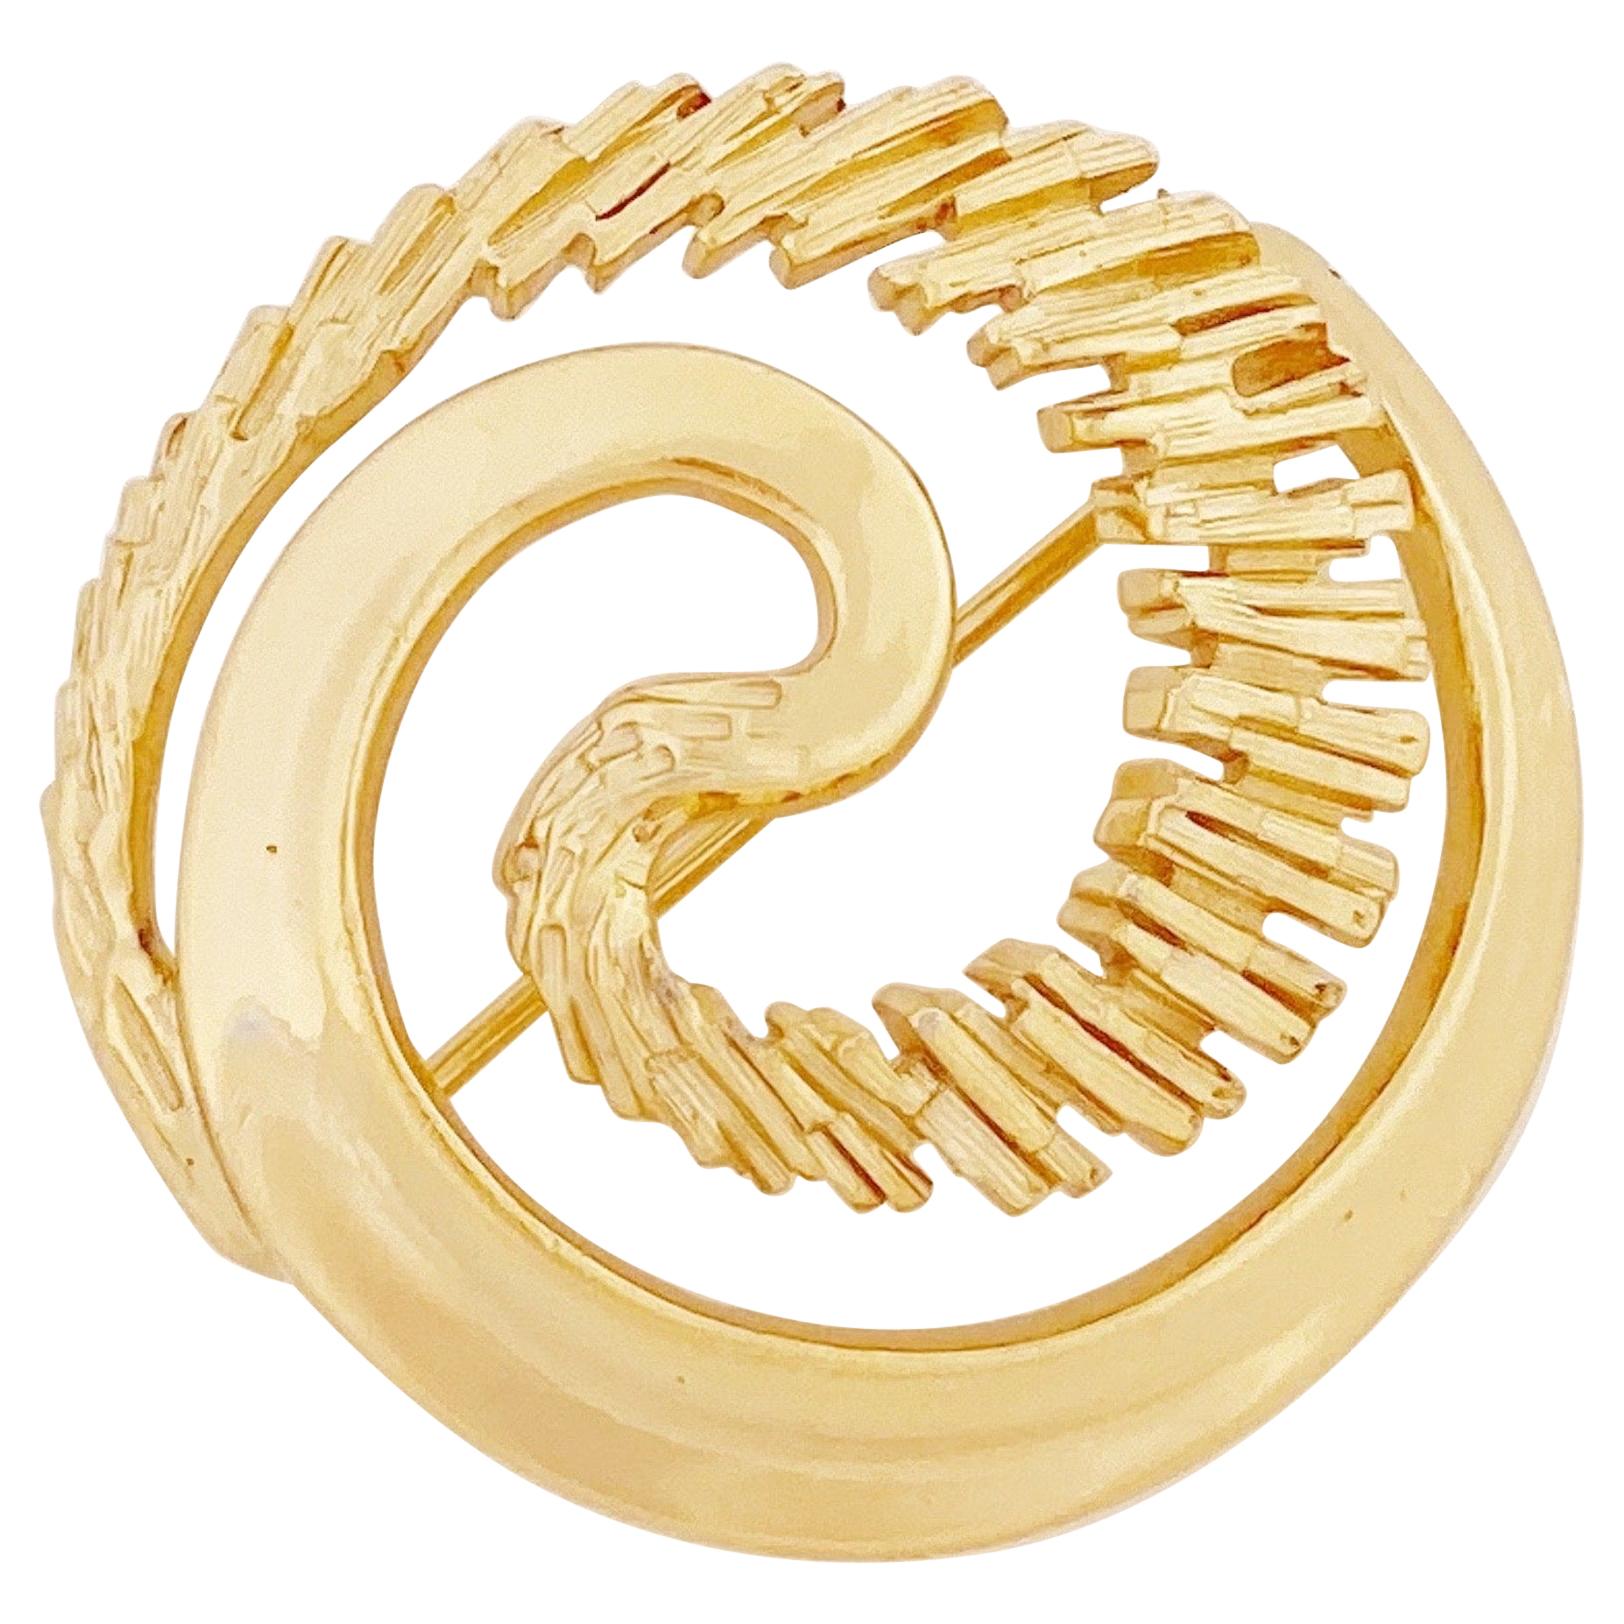 Gilded Modernist Brutalist Abstract Circle Brooch By Napier, 1980s